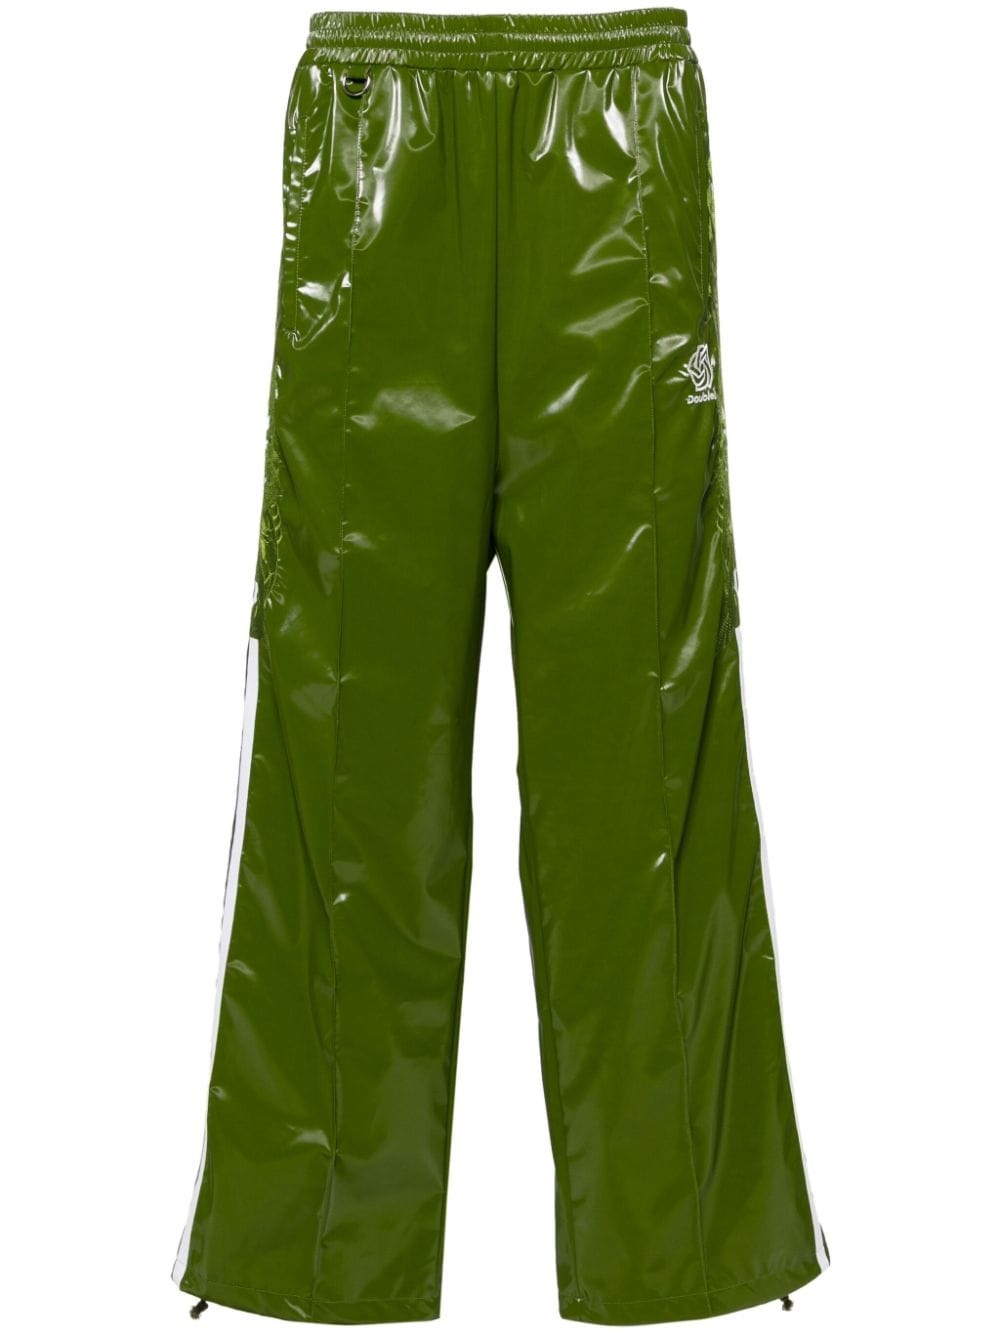 Laminate Track embroidered track pants - 1